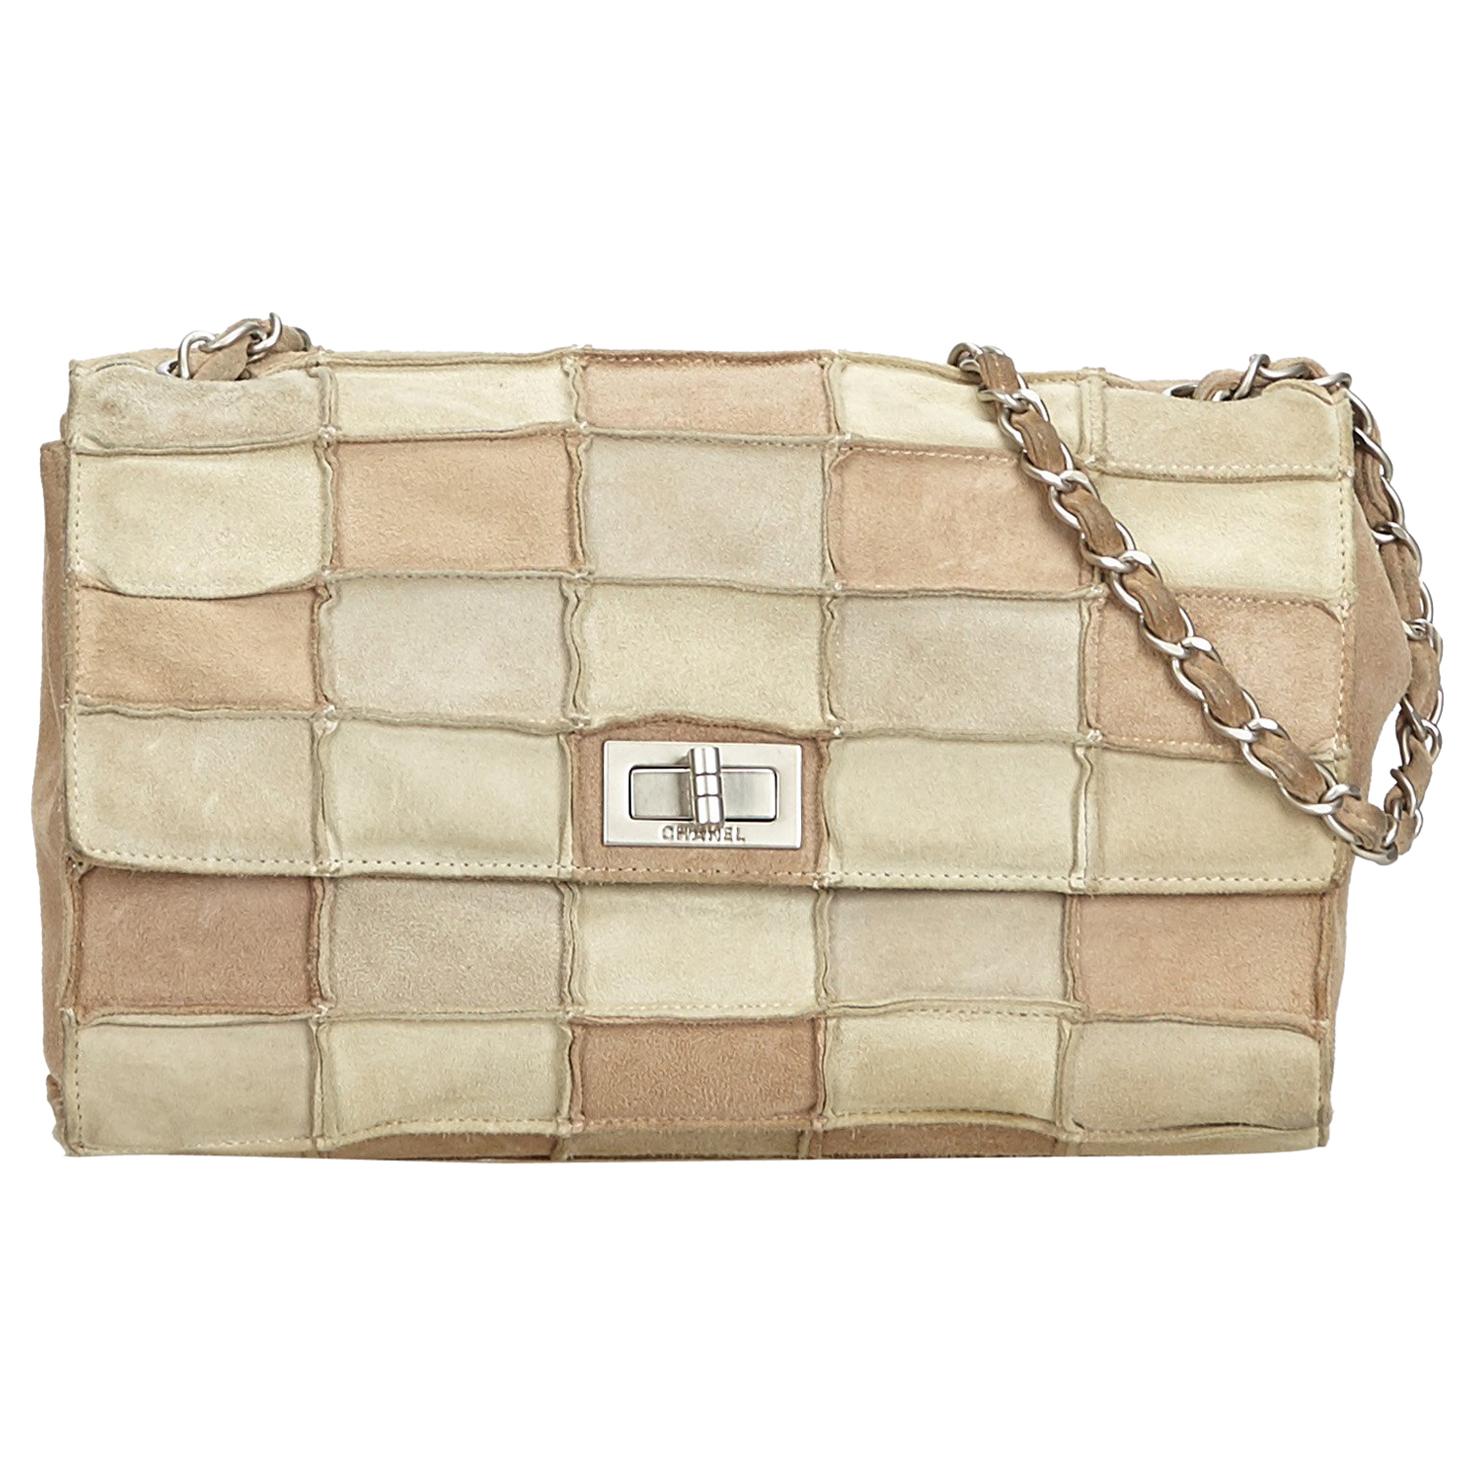 Chanel Brown Reissue Patchwork Flap Bag